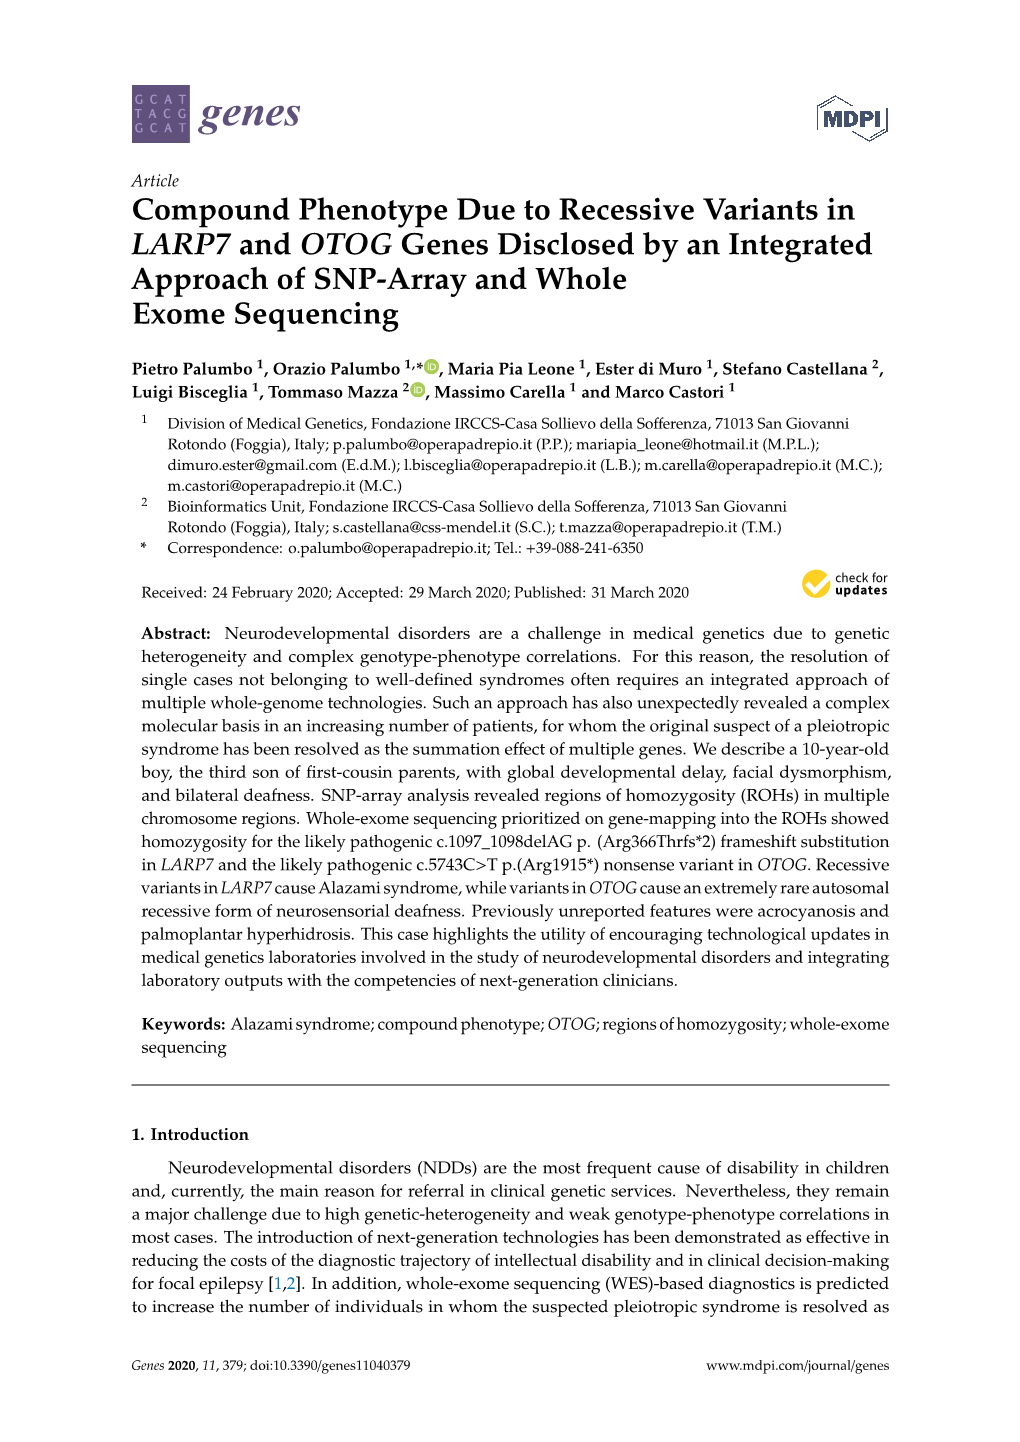 Compound Phenotype Due to Recessive Variants in LARP7 and OTOG Genes Disclosed by an Integrated Approach of SNP-Array and Whole Exome Sequencing